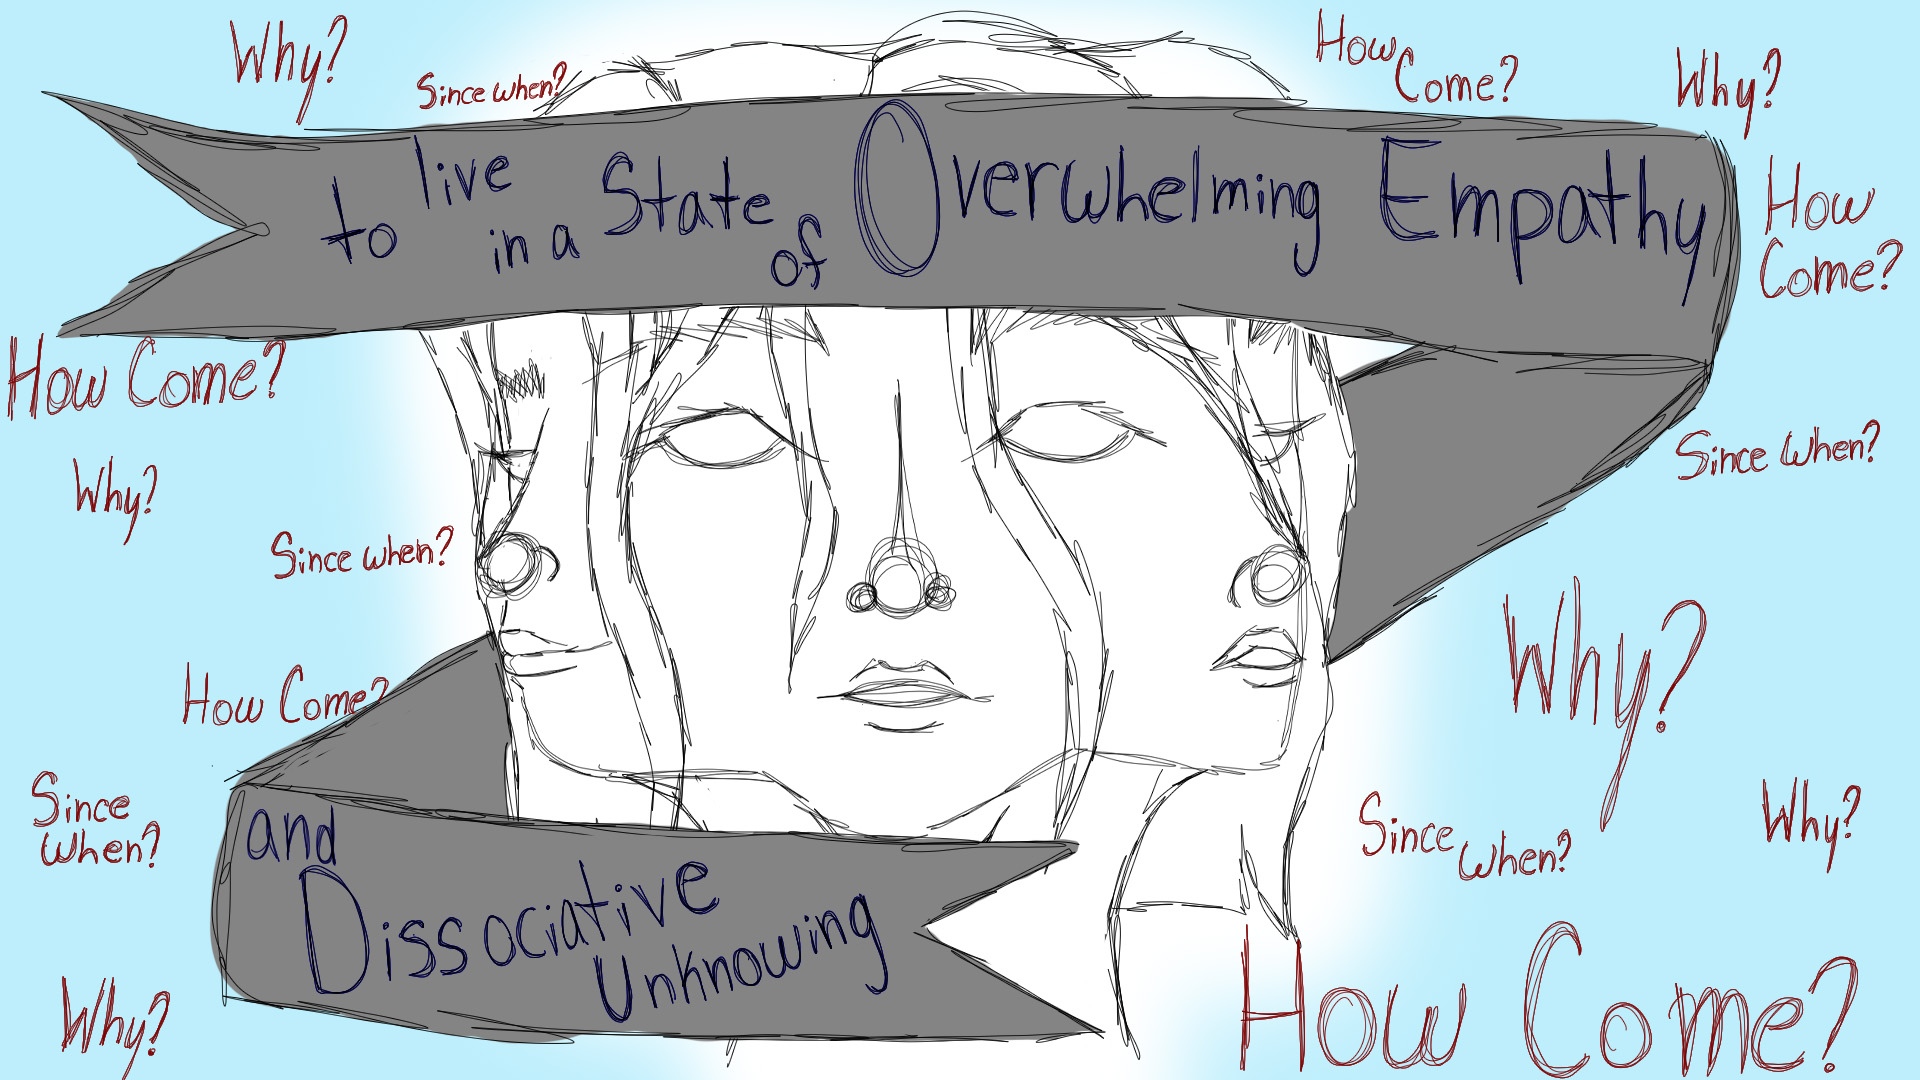 A drawing of a three-faced head with a gray banner wrapped around them saying "to live in a State of Overwhelming Empathy and Dissociative Unknowing" with red words surrounding them saying "why?" "how come?" "since when?" over and over